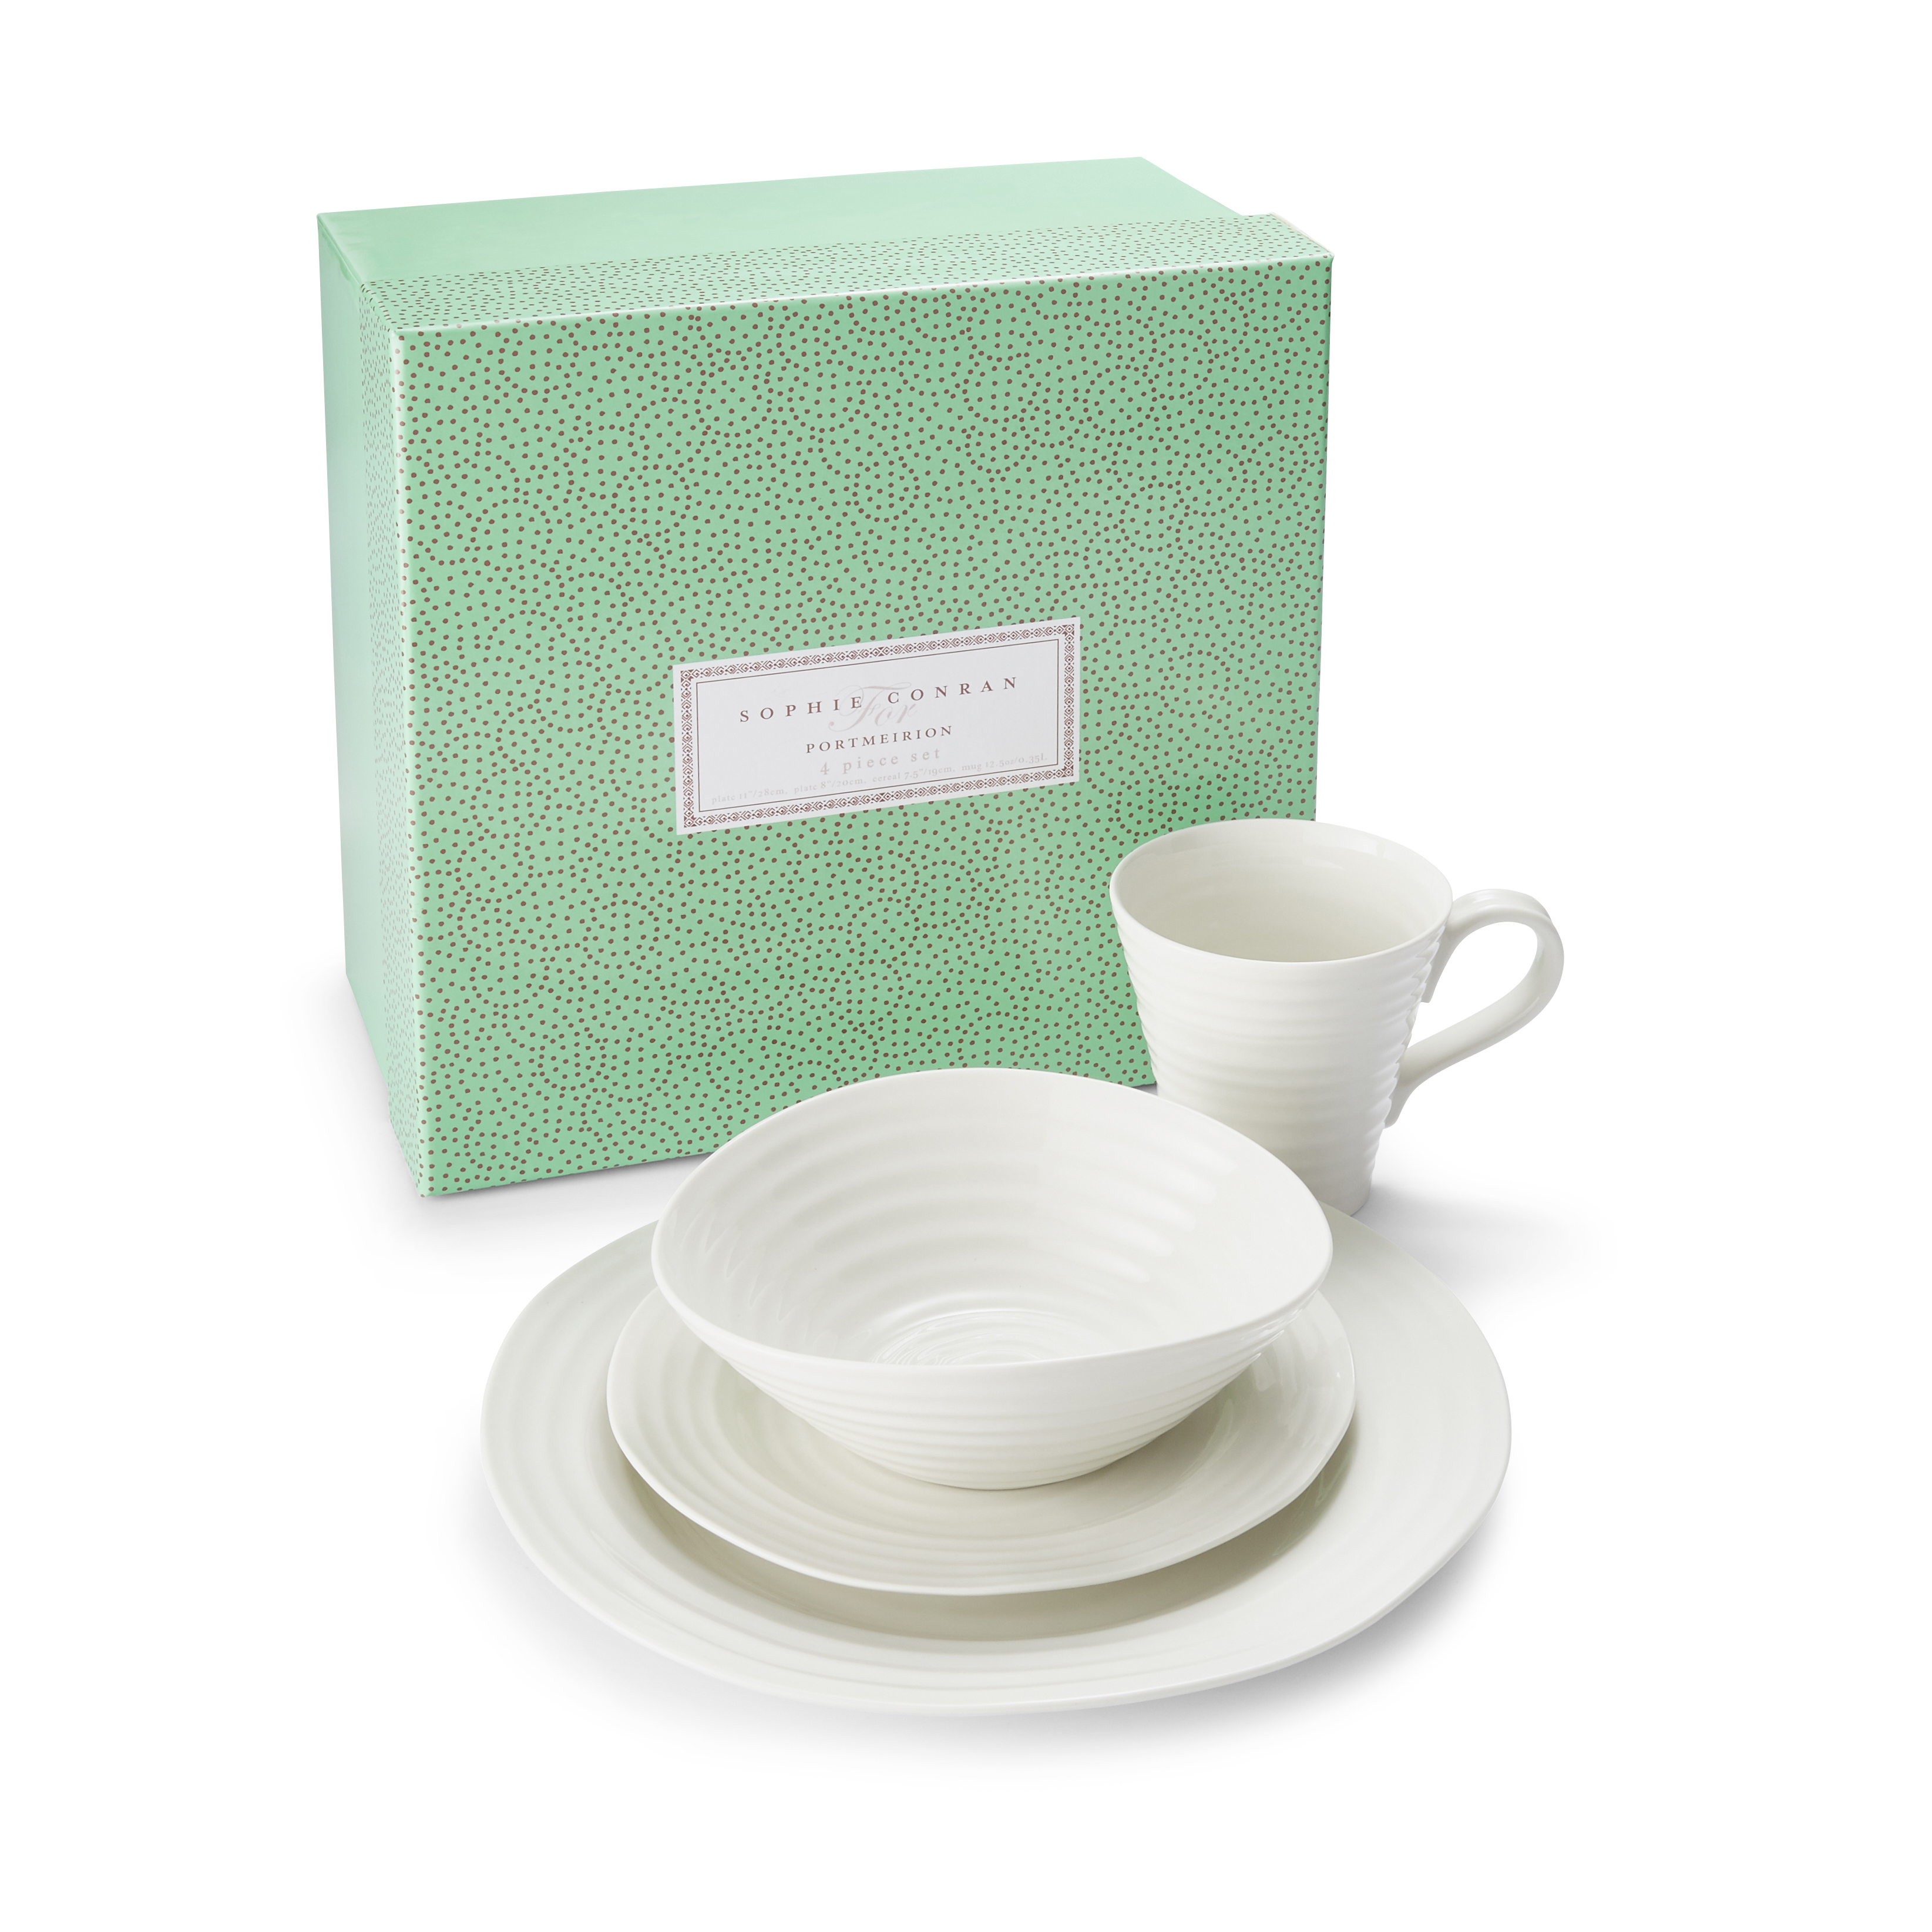 Sophie Conran for White 4 Piece Place Setting image number null